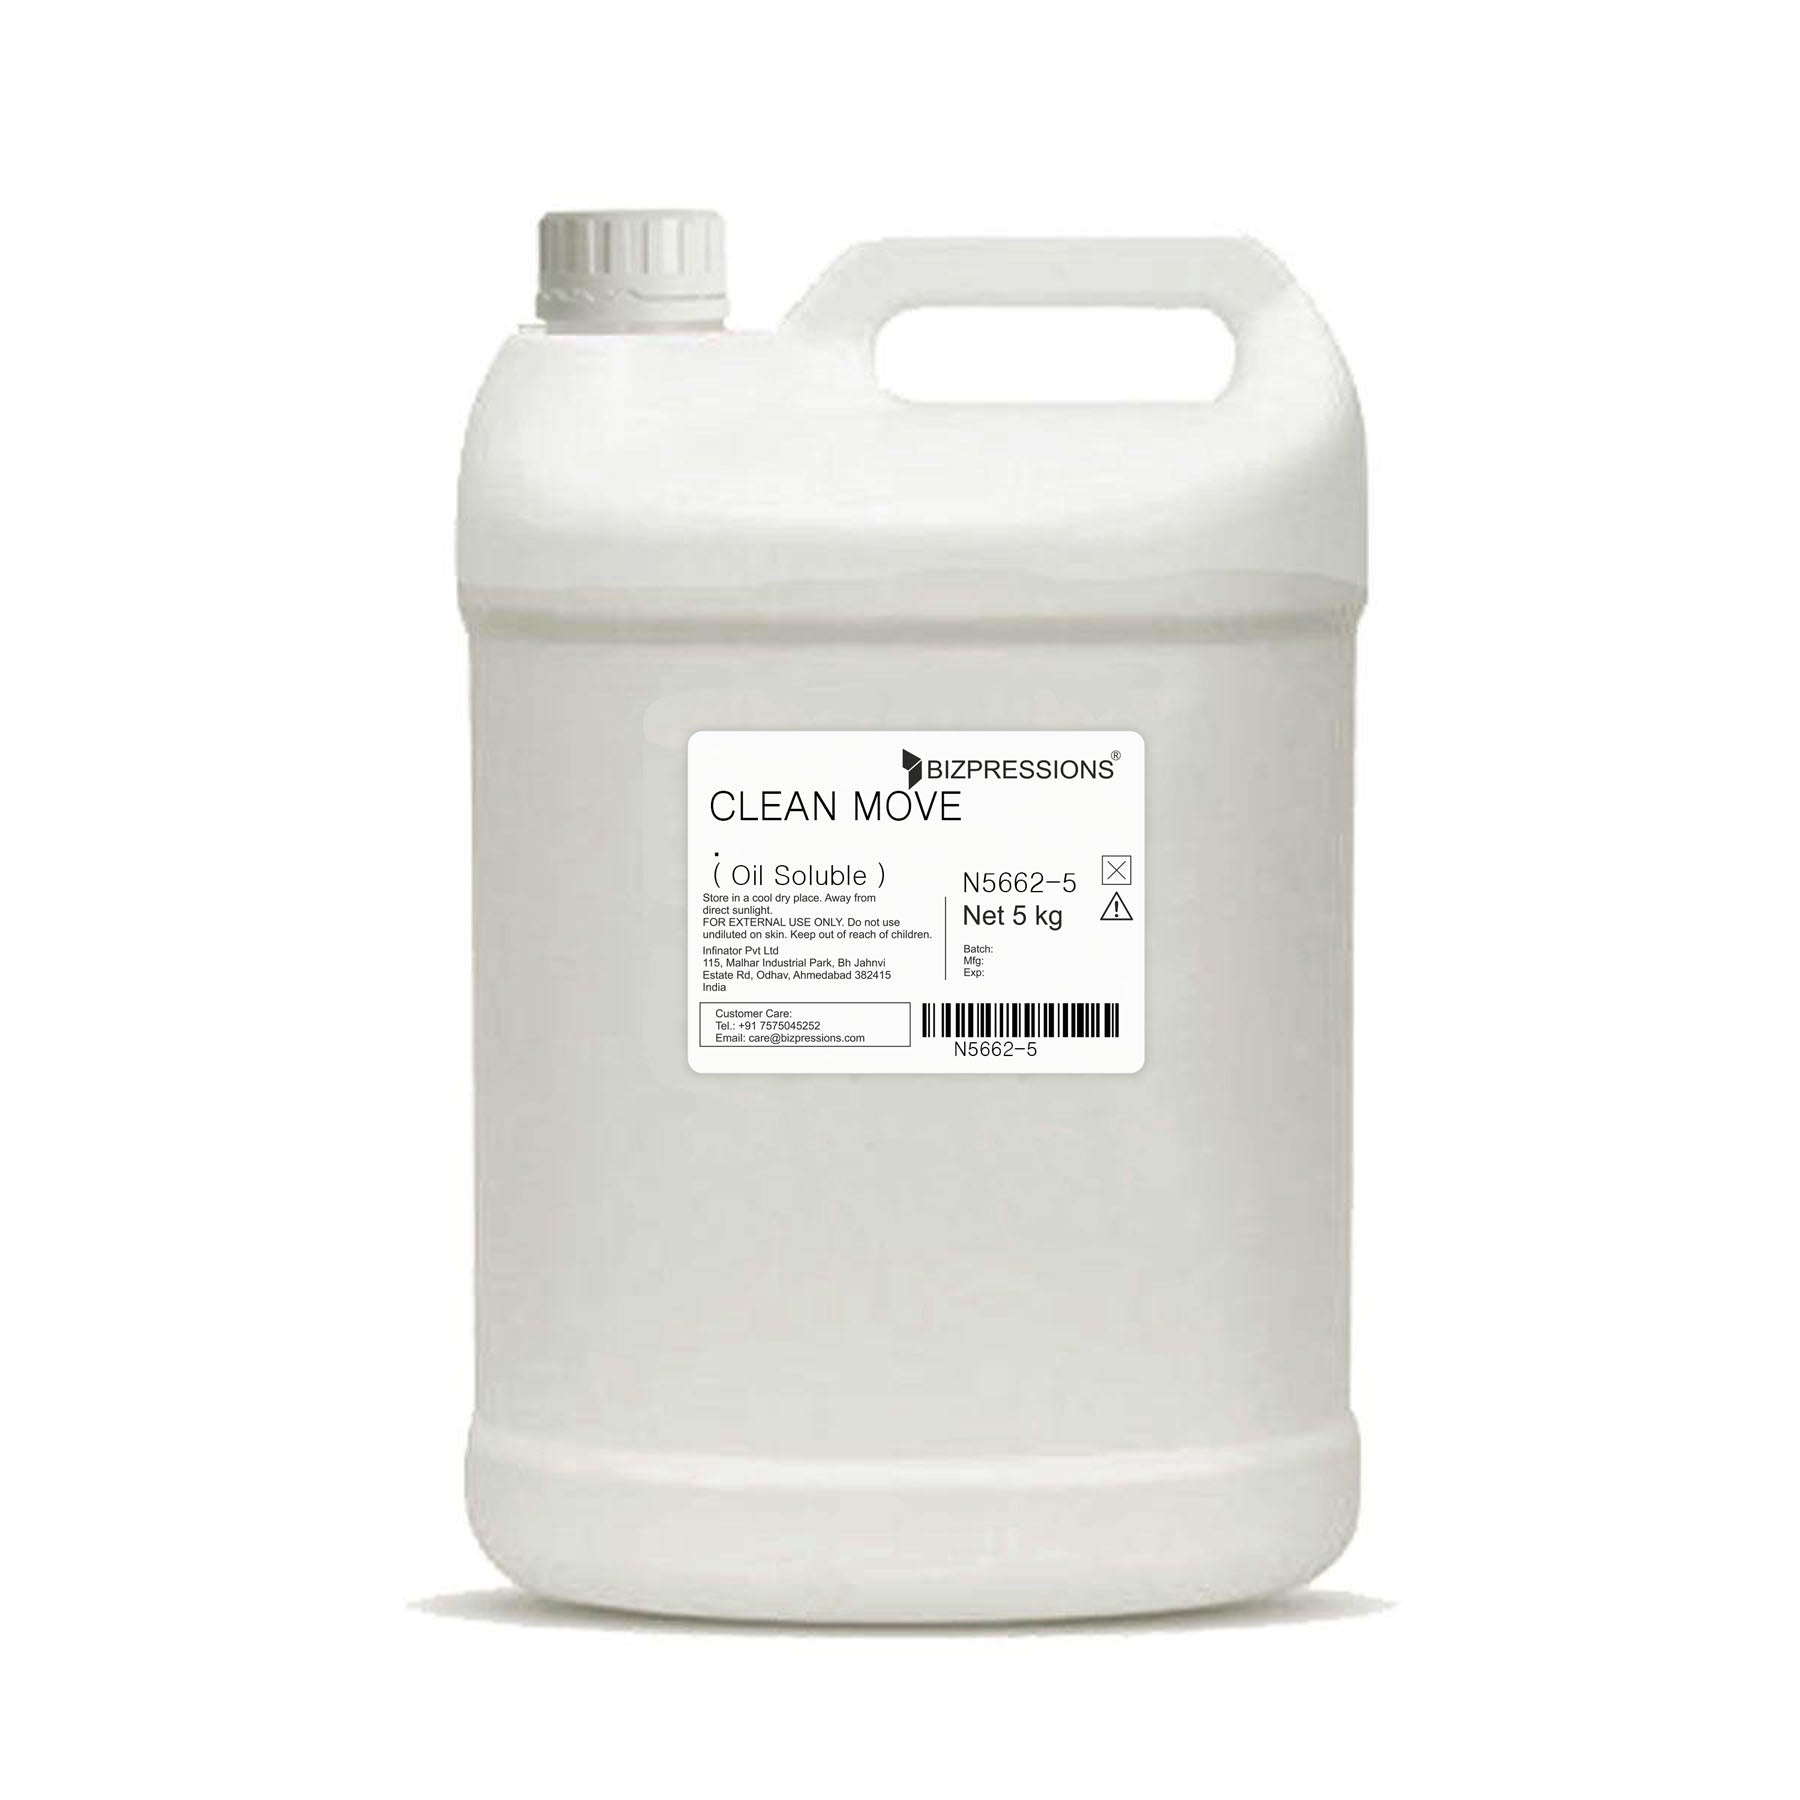 CLEAN MOVE - Fragrance ( Oil Soluble ) - 5 kg